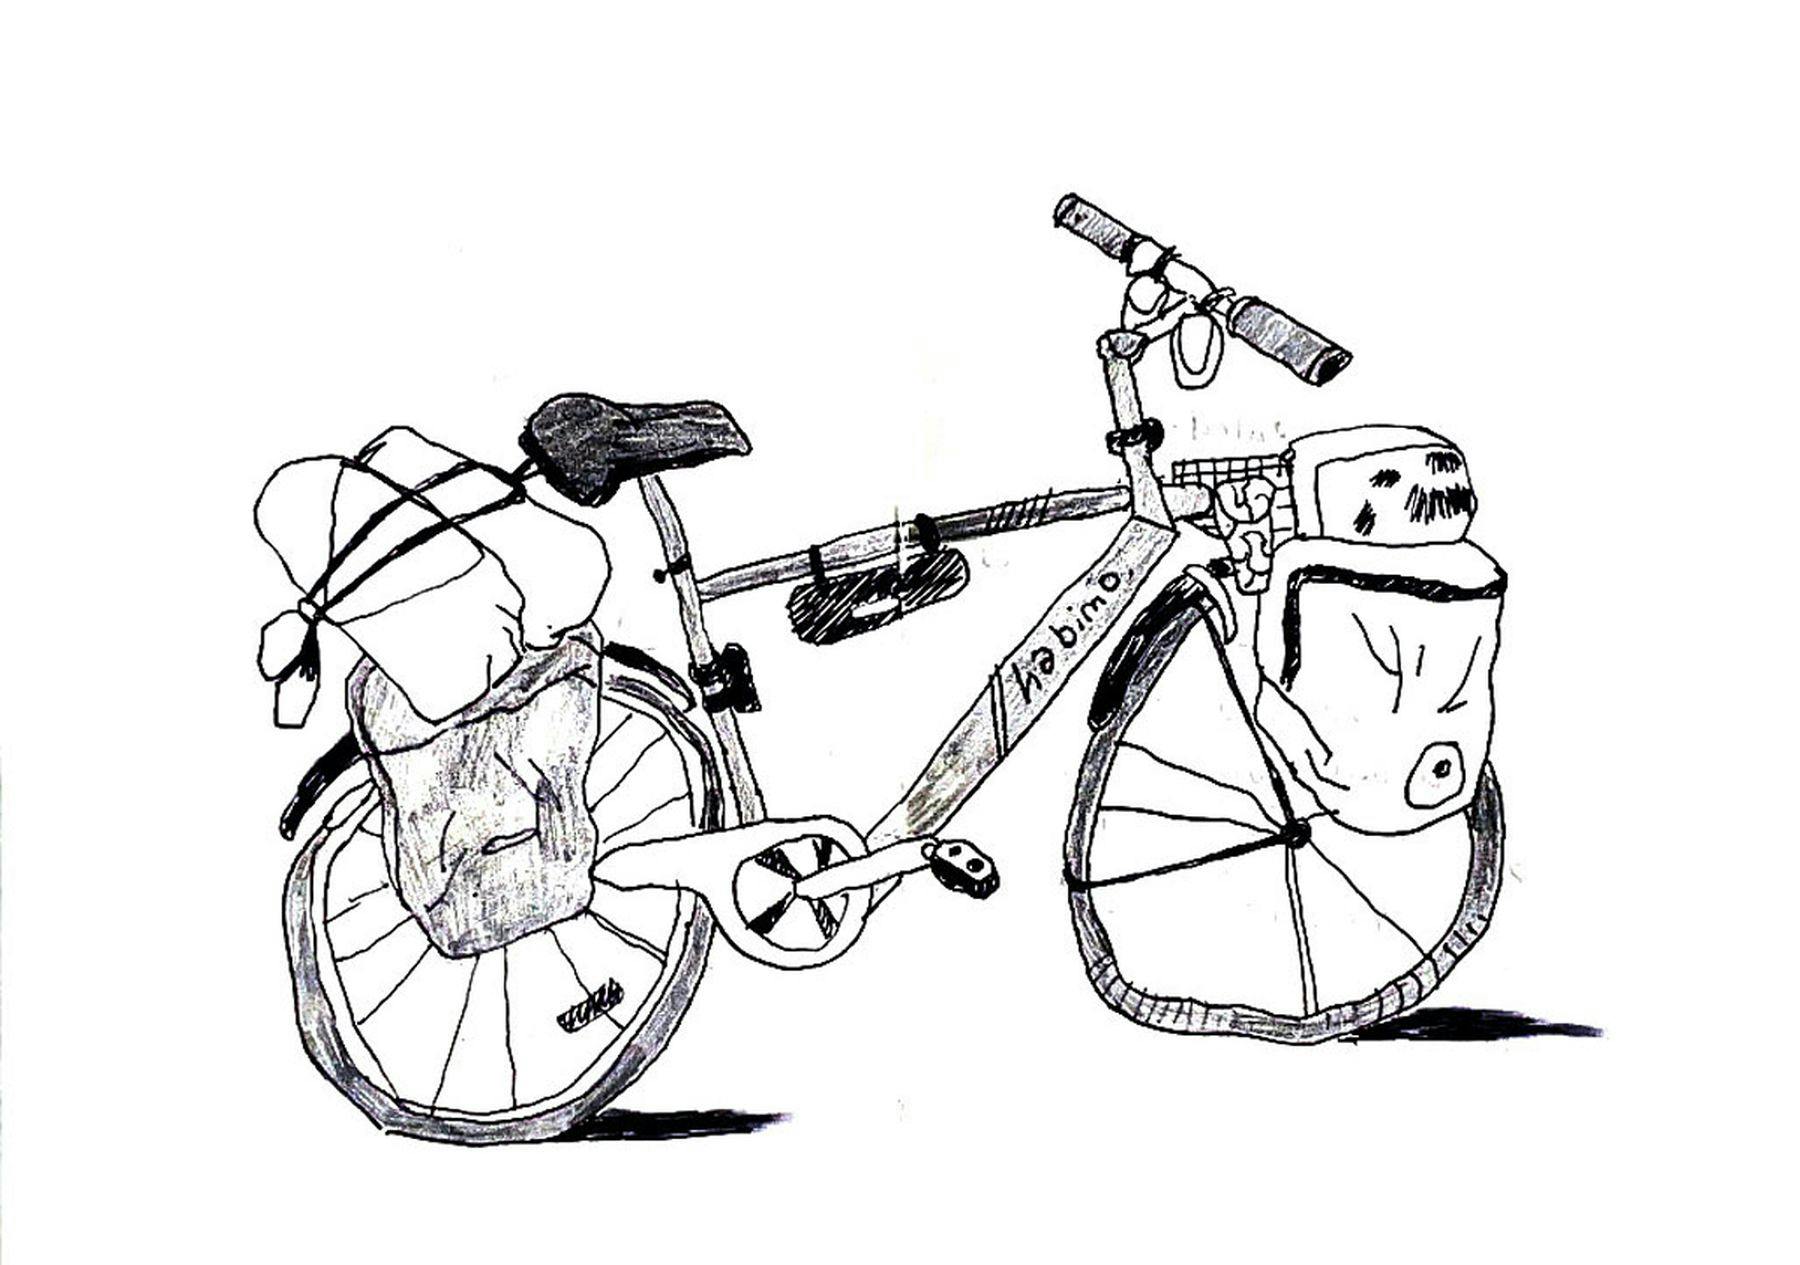 A pencil sketch of a bicycle with bags strapped to the front and back. The name of the bicycle “habimbo” is written on the bicycle’s down tube.